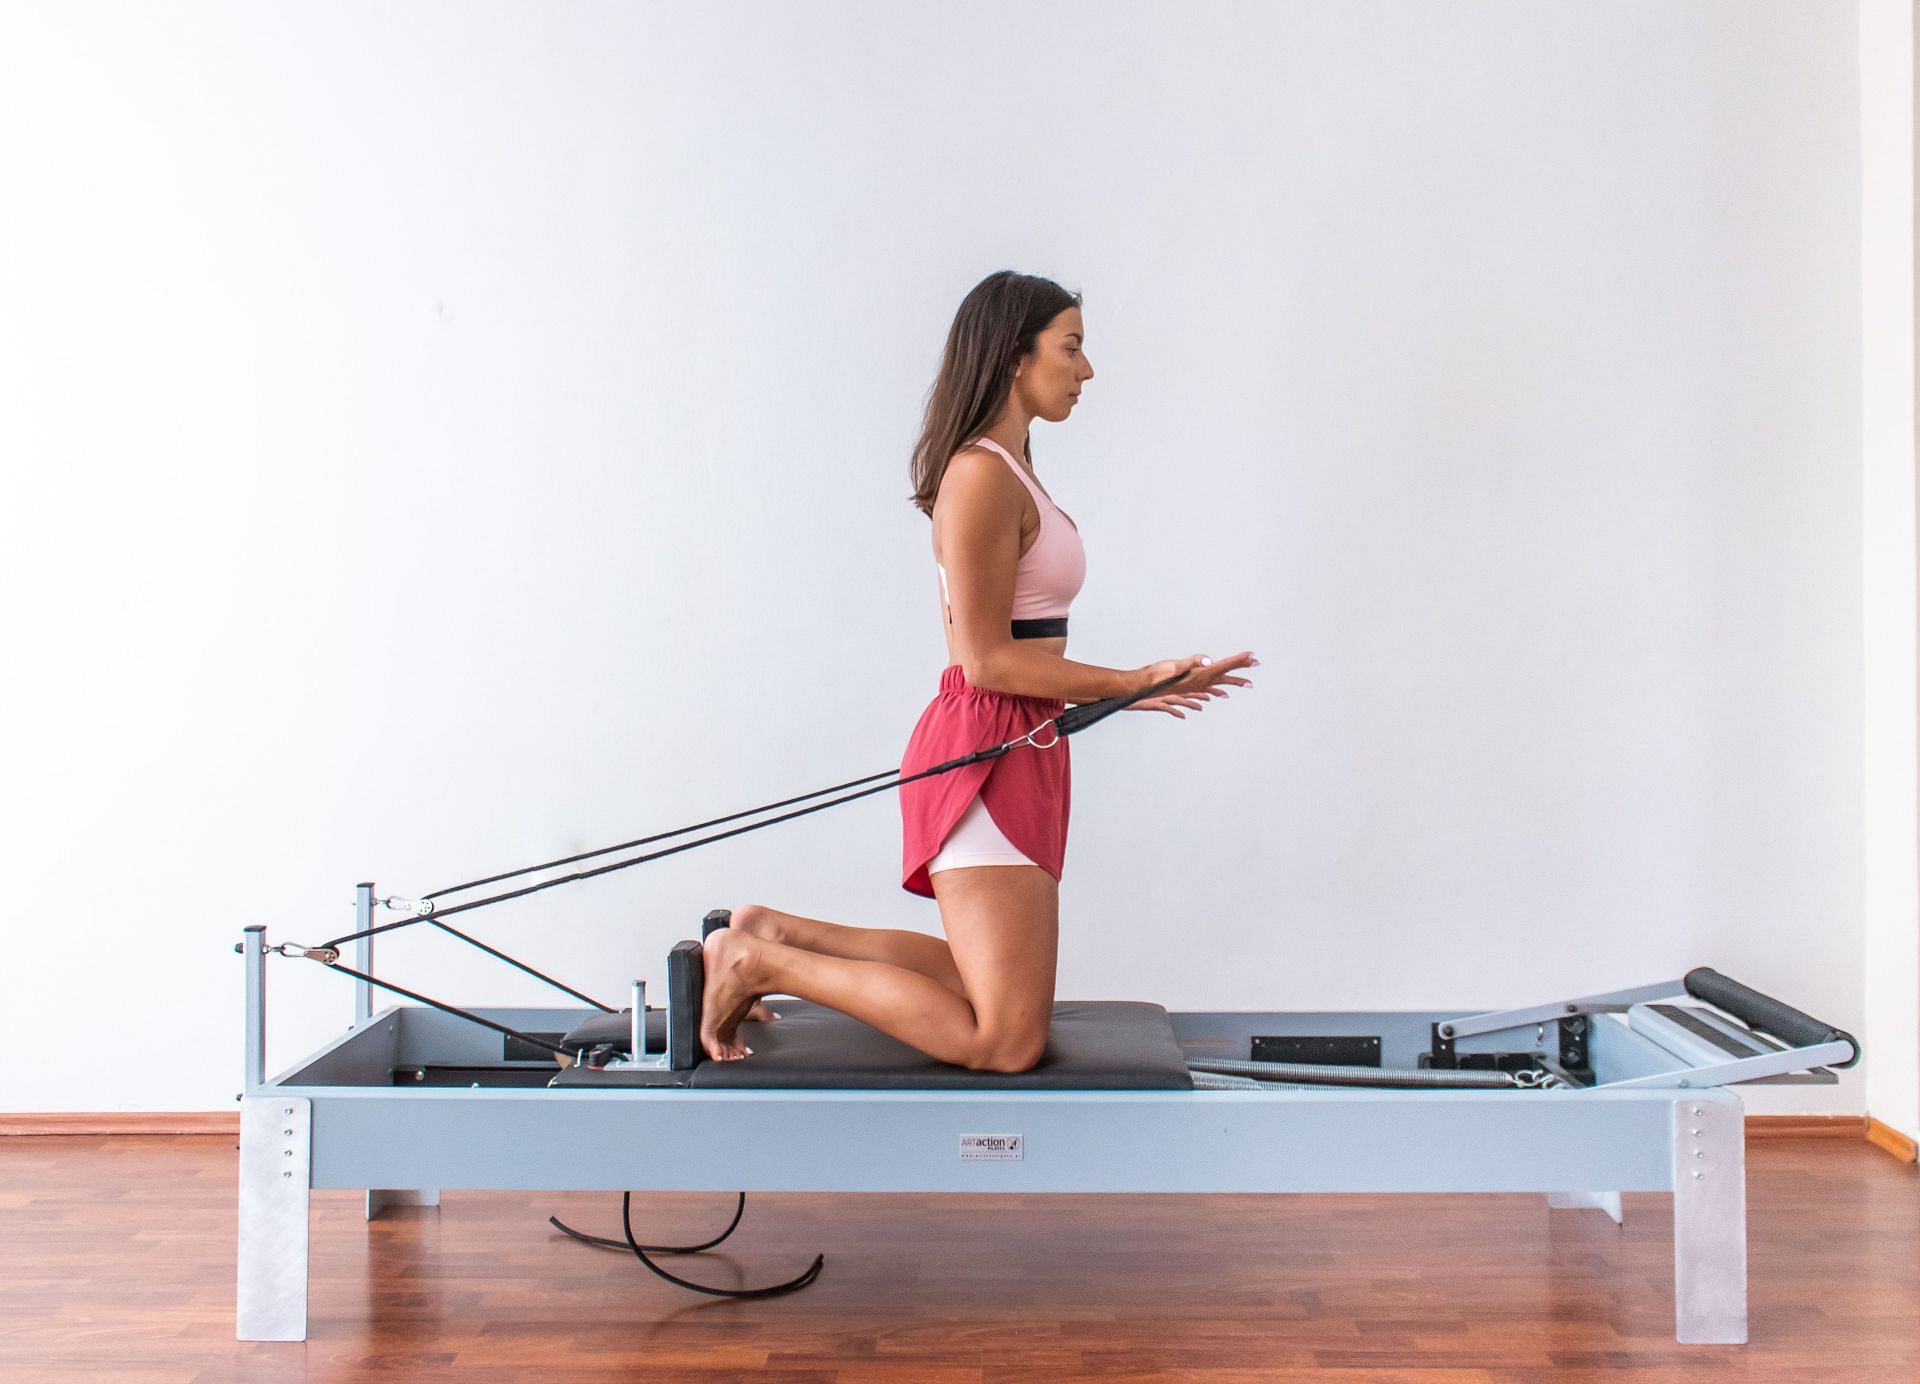 Pilates reformer exercises can help you improve your strength, stability and flexibility (Image via Pexels/Maria Charizani)